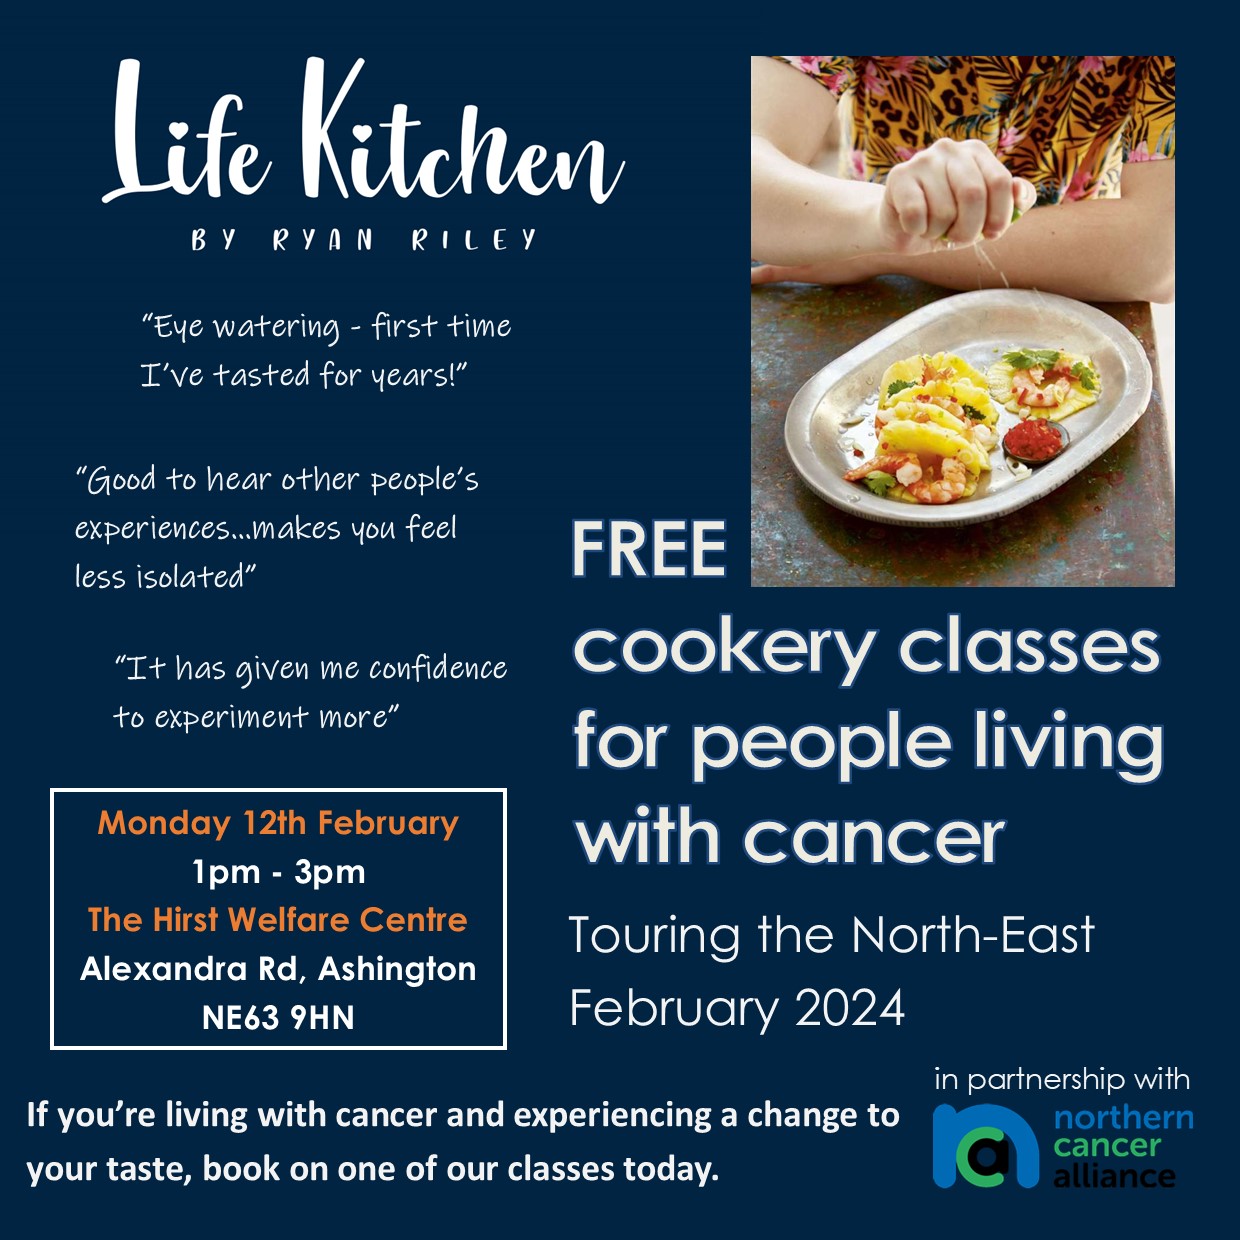 Free cookery classes for cancer patients